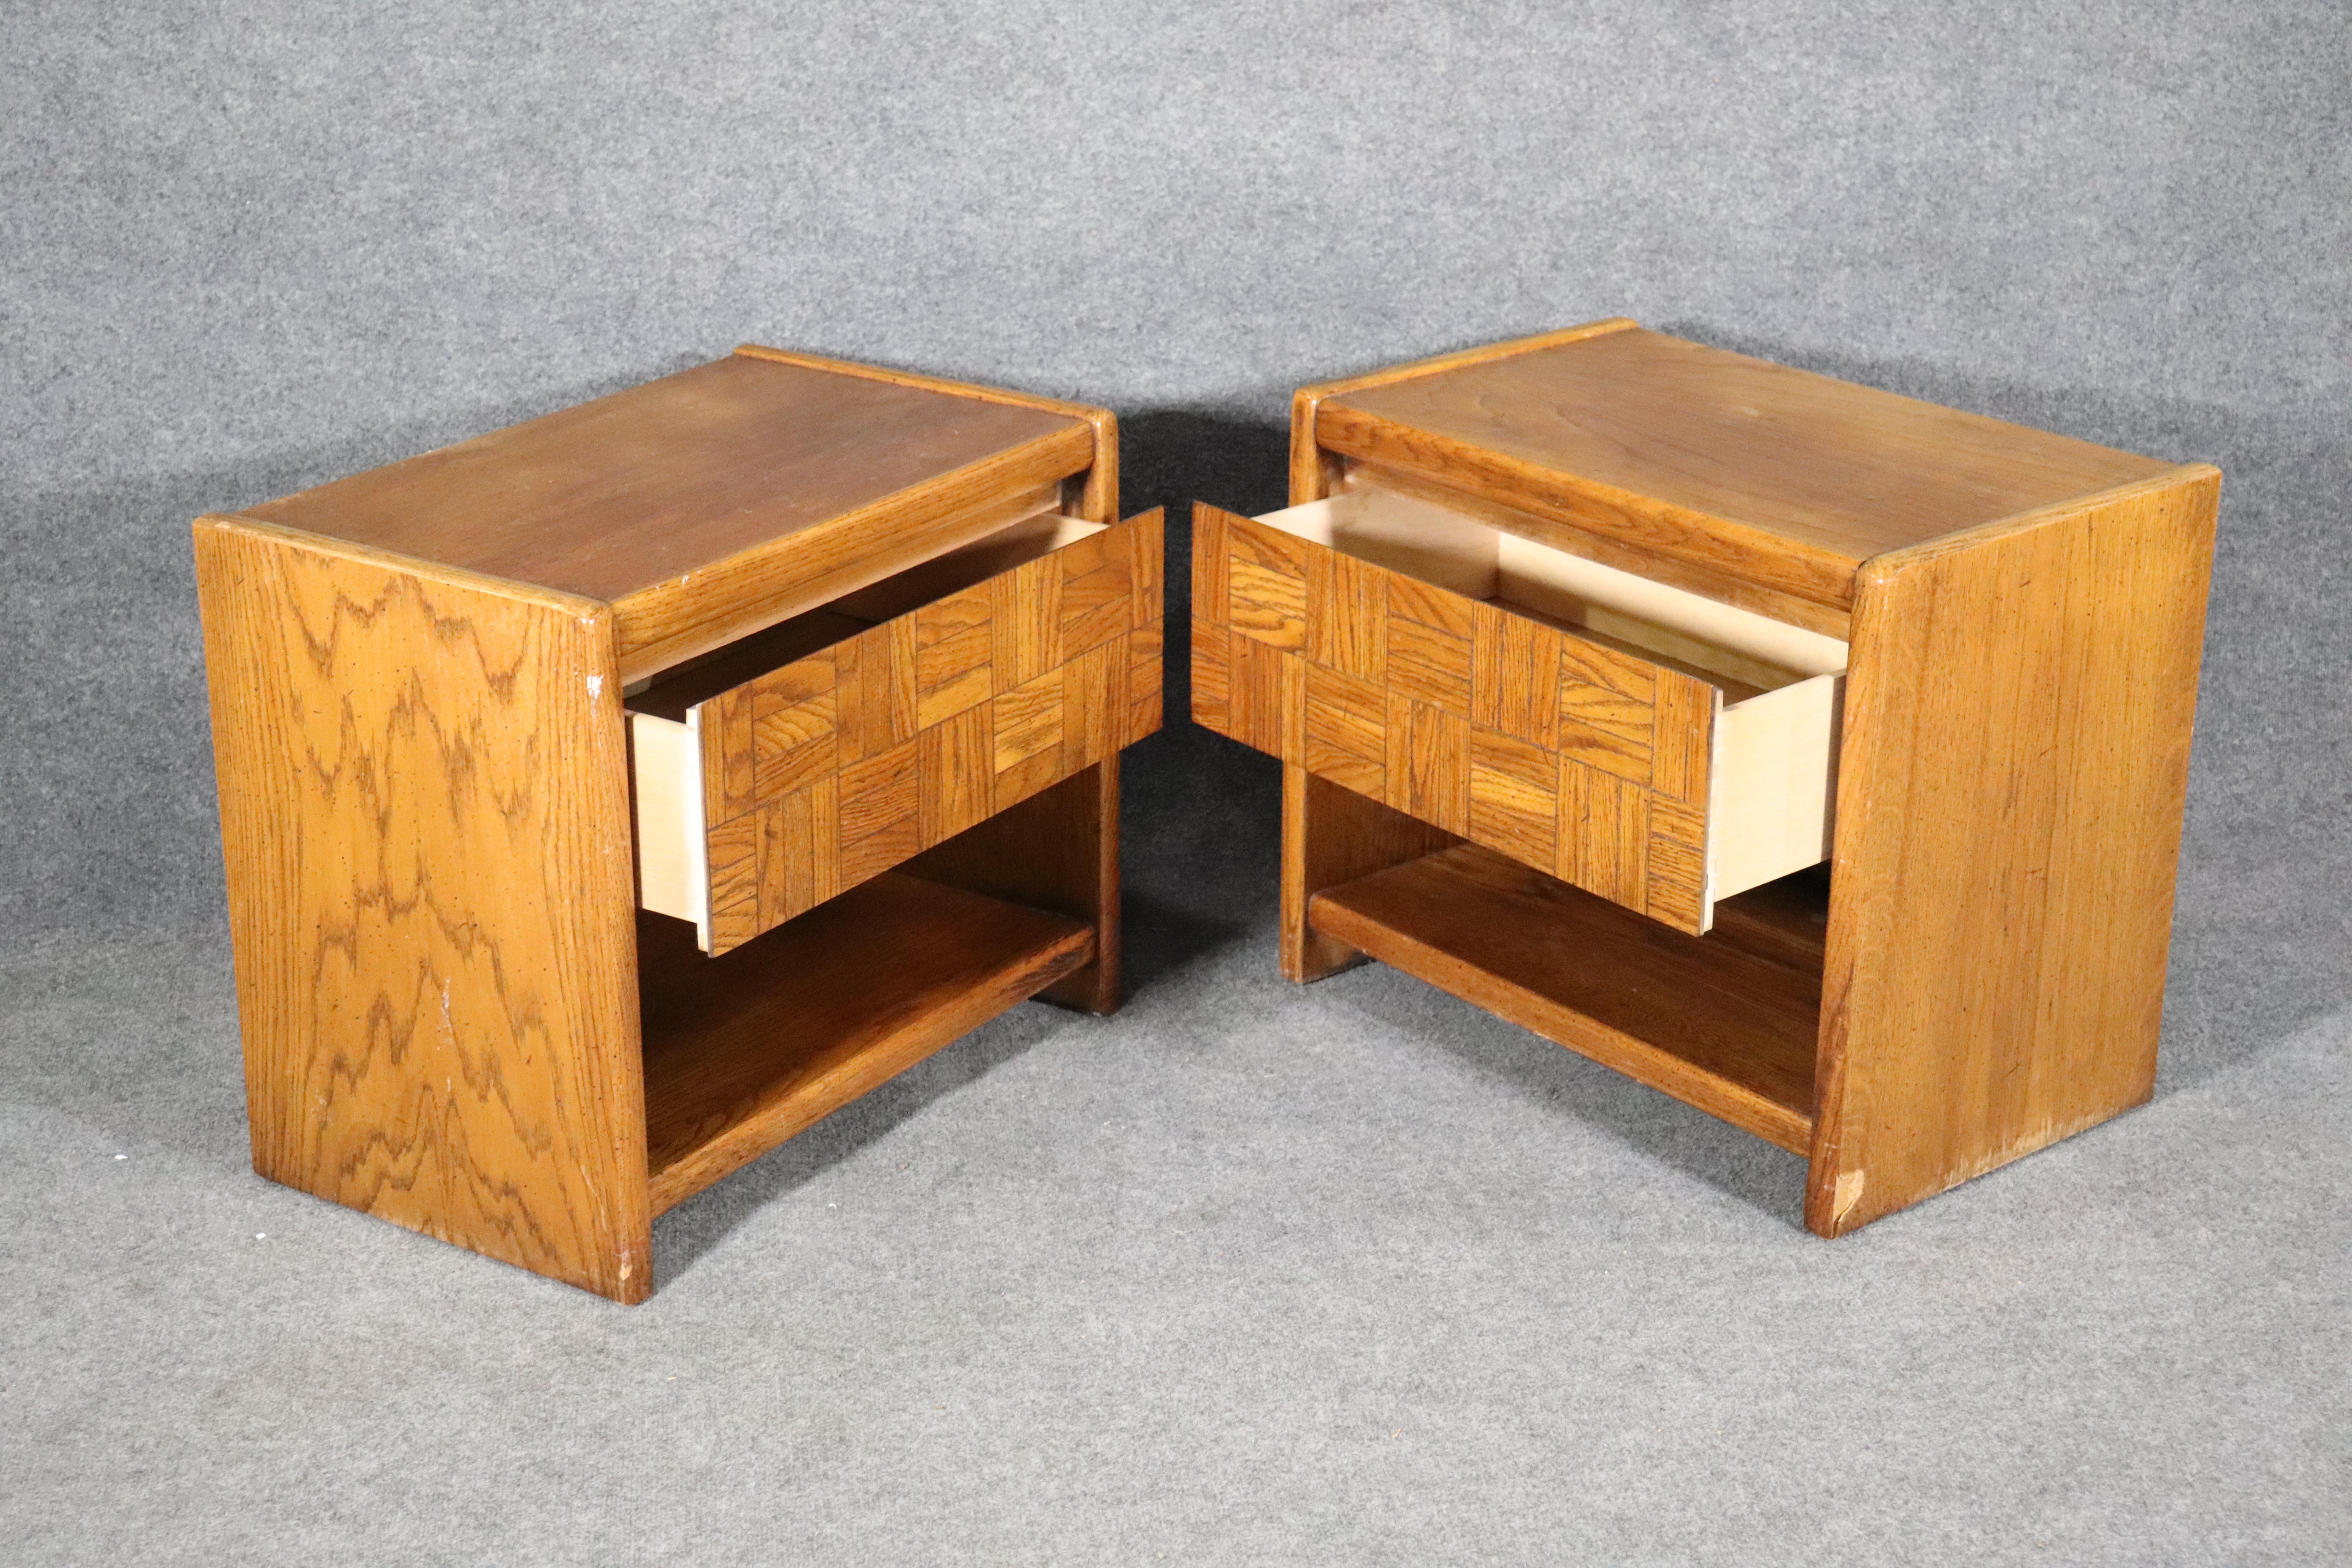 Pair of mid-century end tables by Lane Furniture. Oak wood grain with tile motif drawers.
Please confirm location NY or NJ